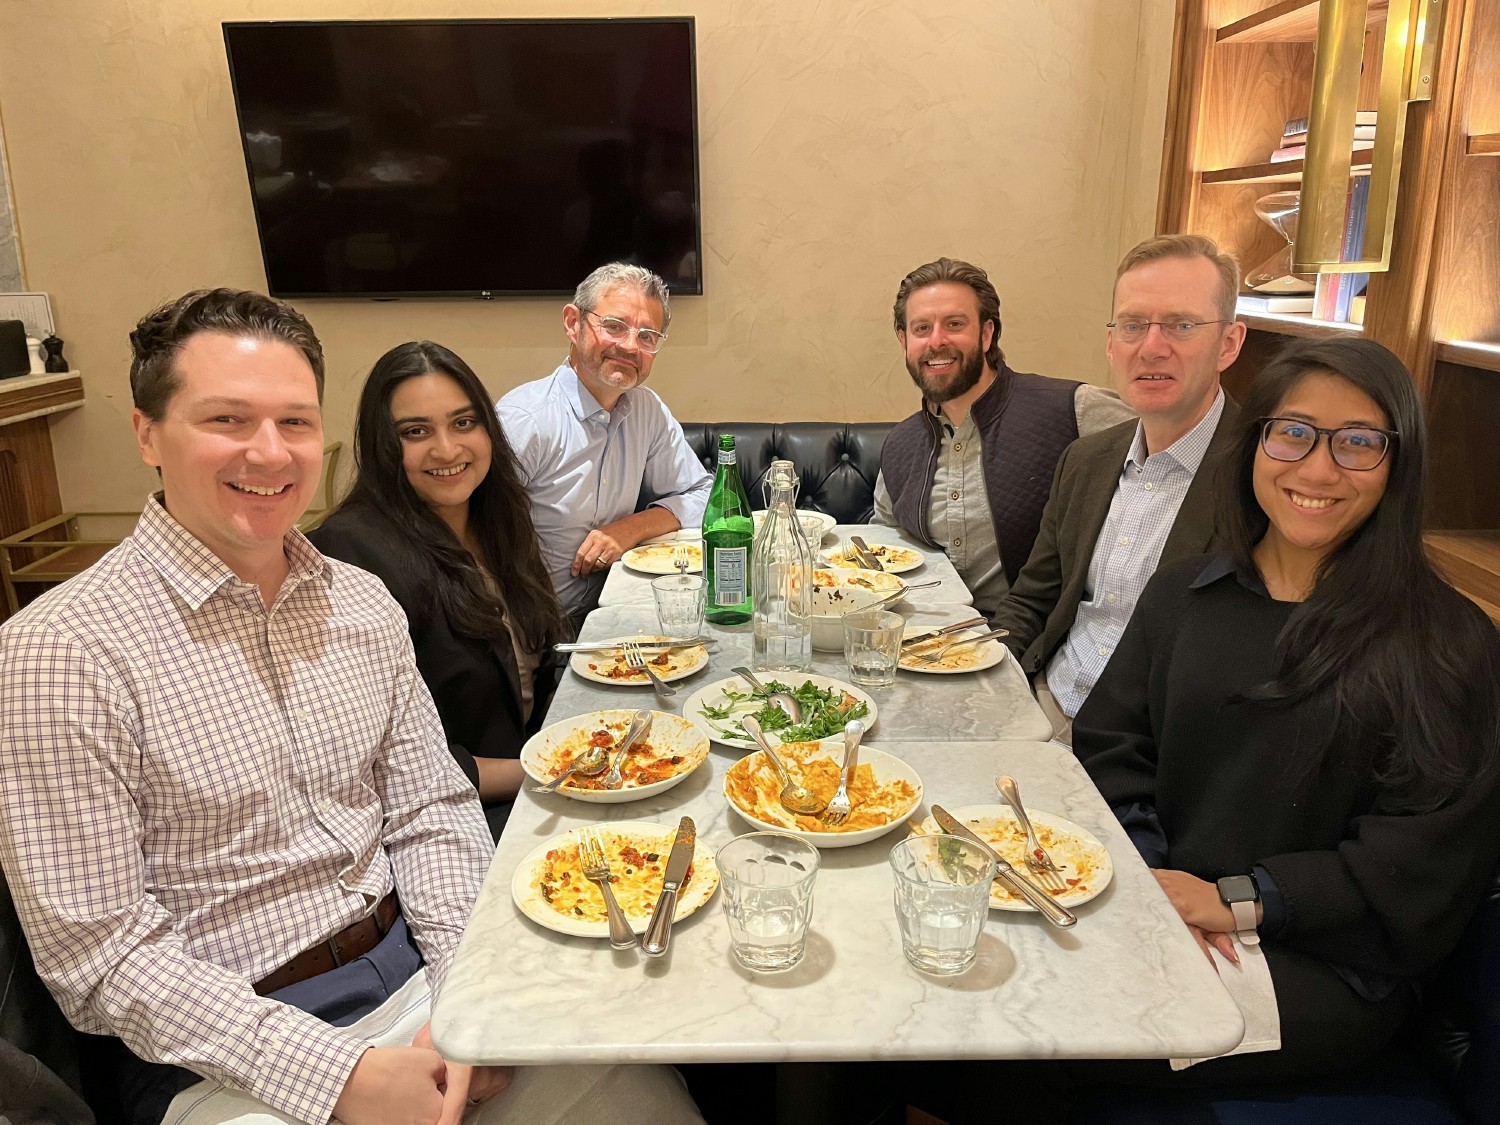 The Berkeley Partnership welcomes our newest joiners over lunch! (near Bryant Park, NYC)